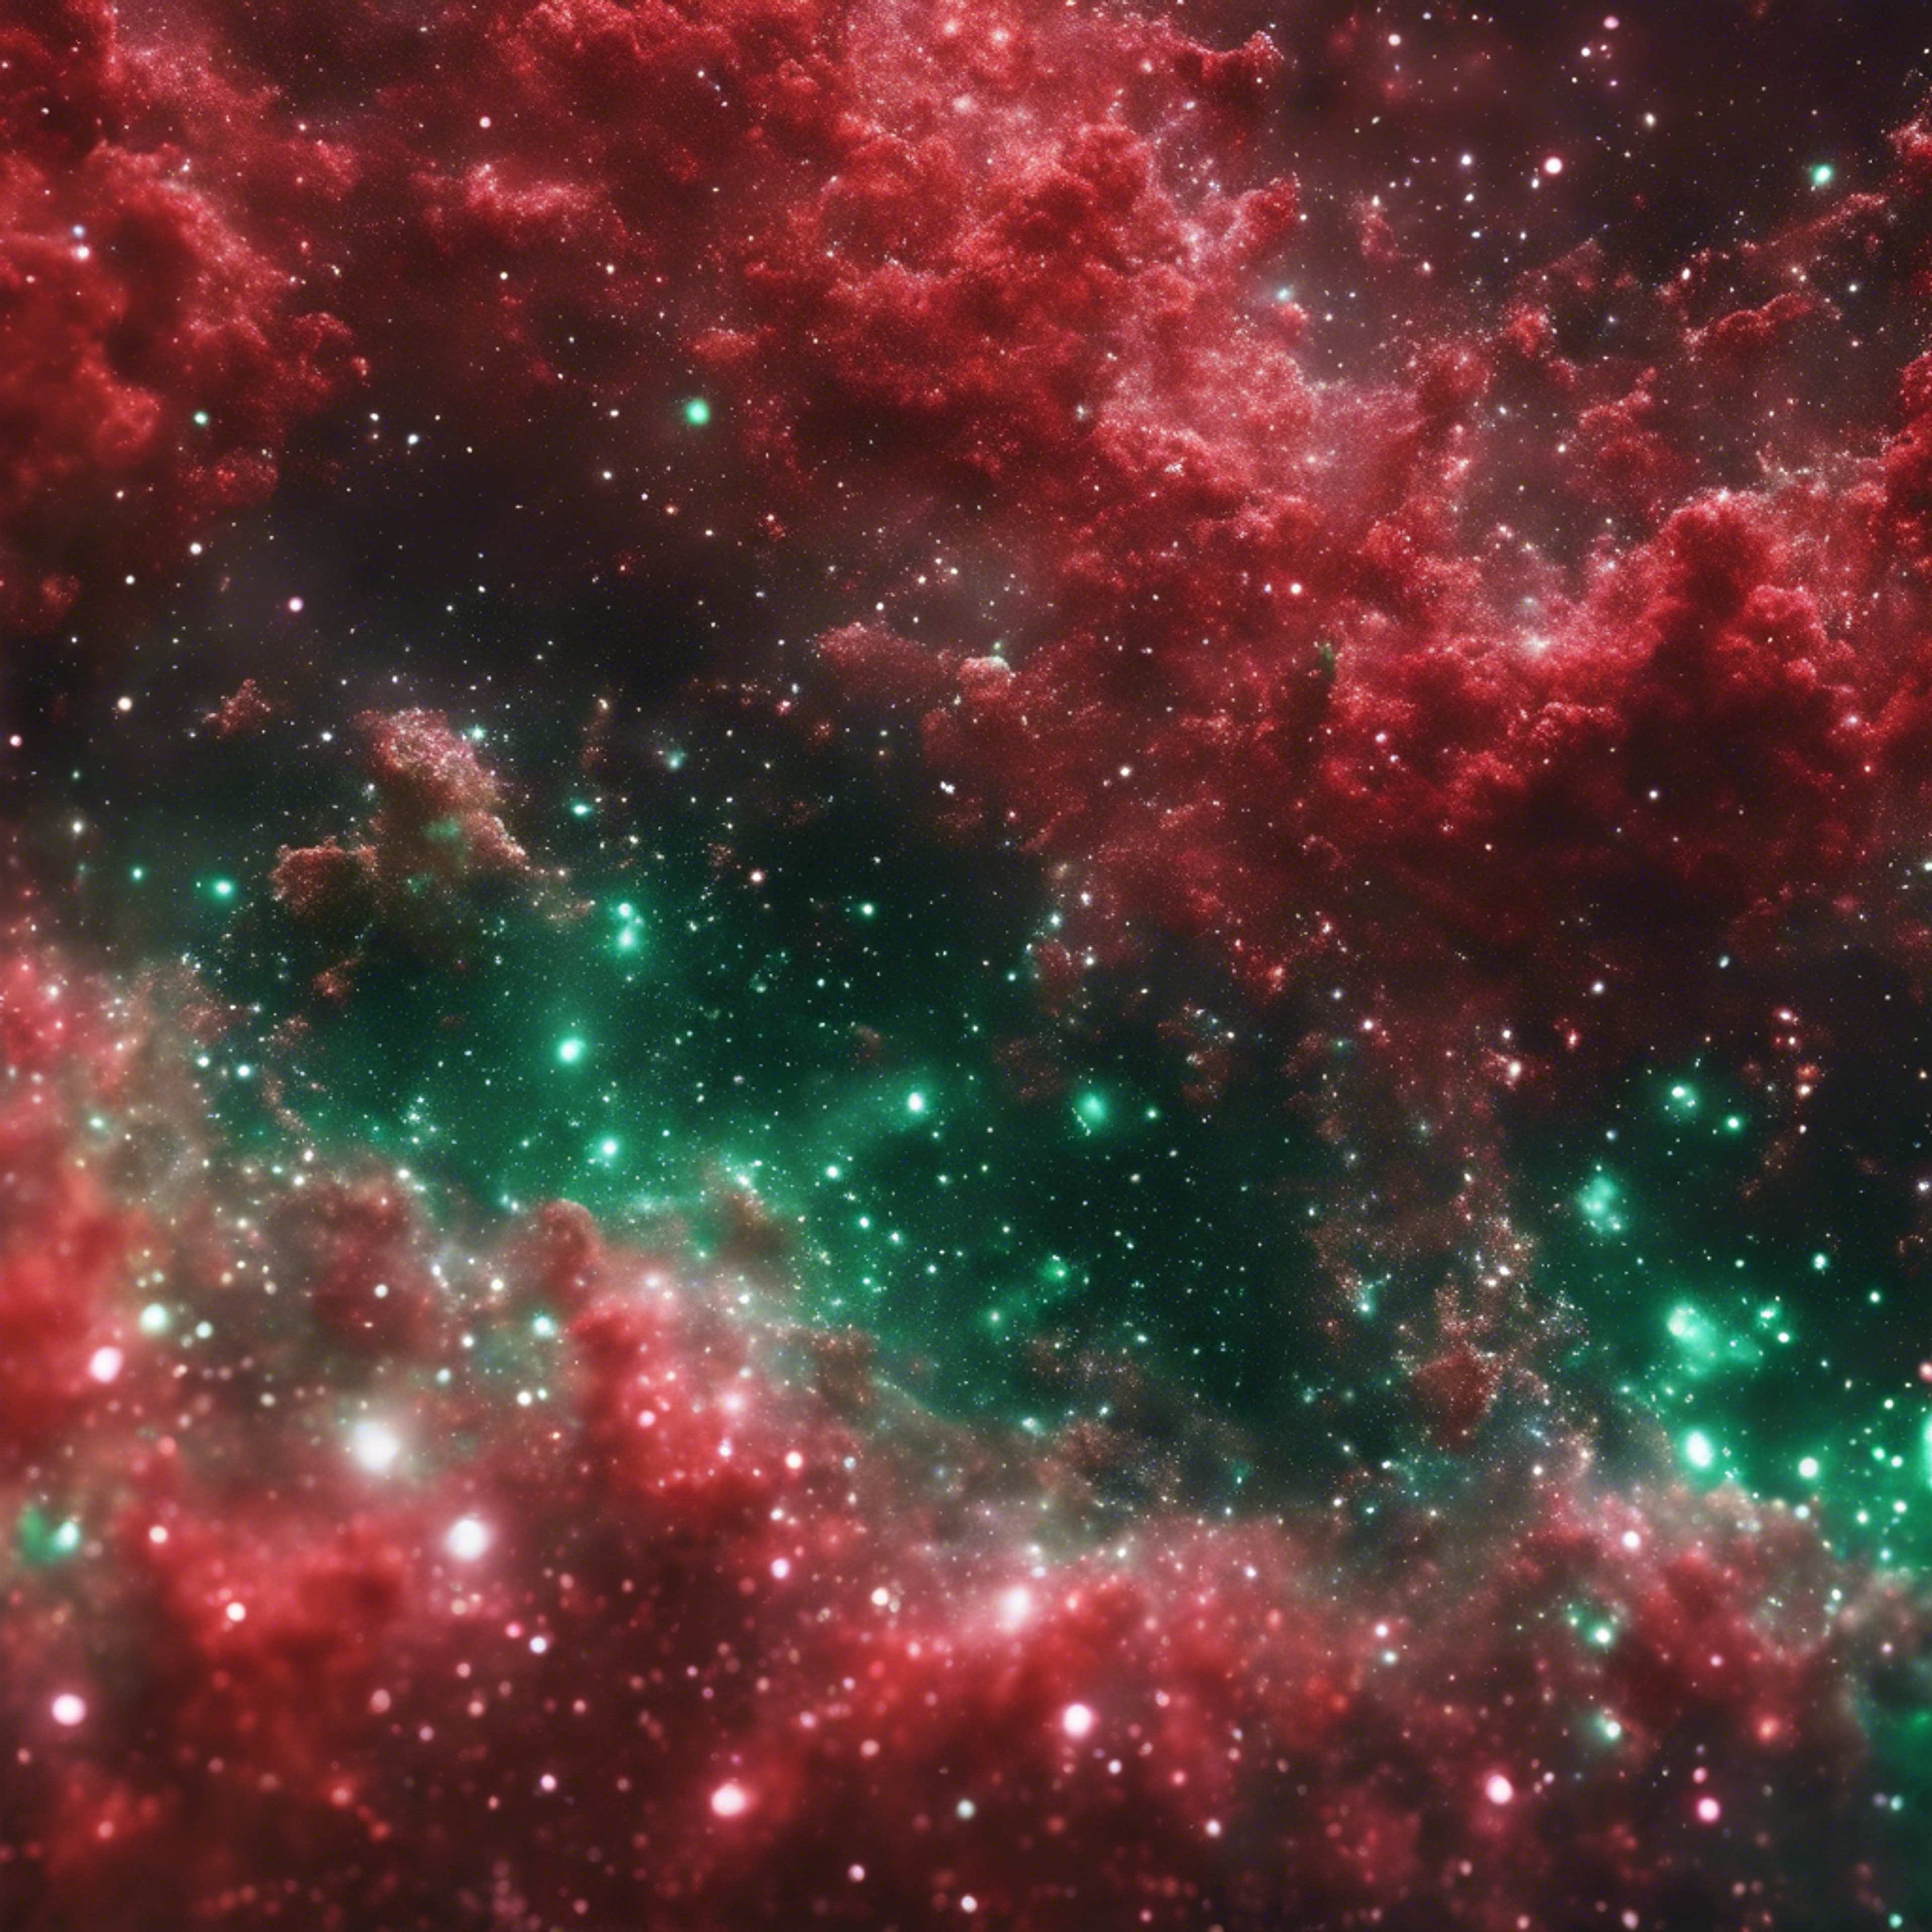 Red and green glitter spread like a nebula in space Tapeet[56bea9c0023d4b1f9afc]